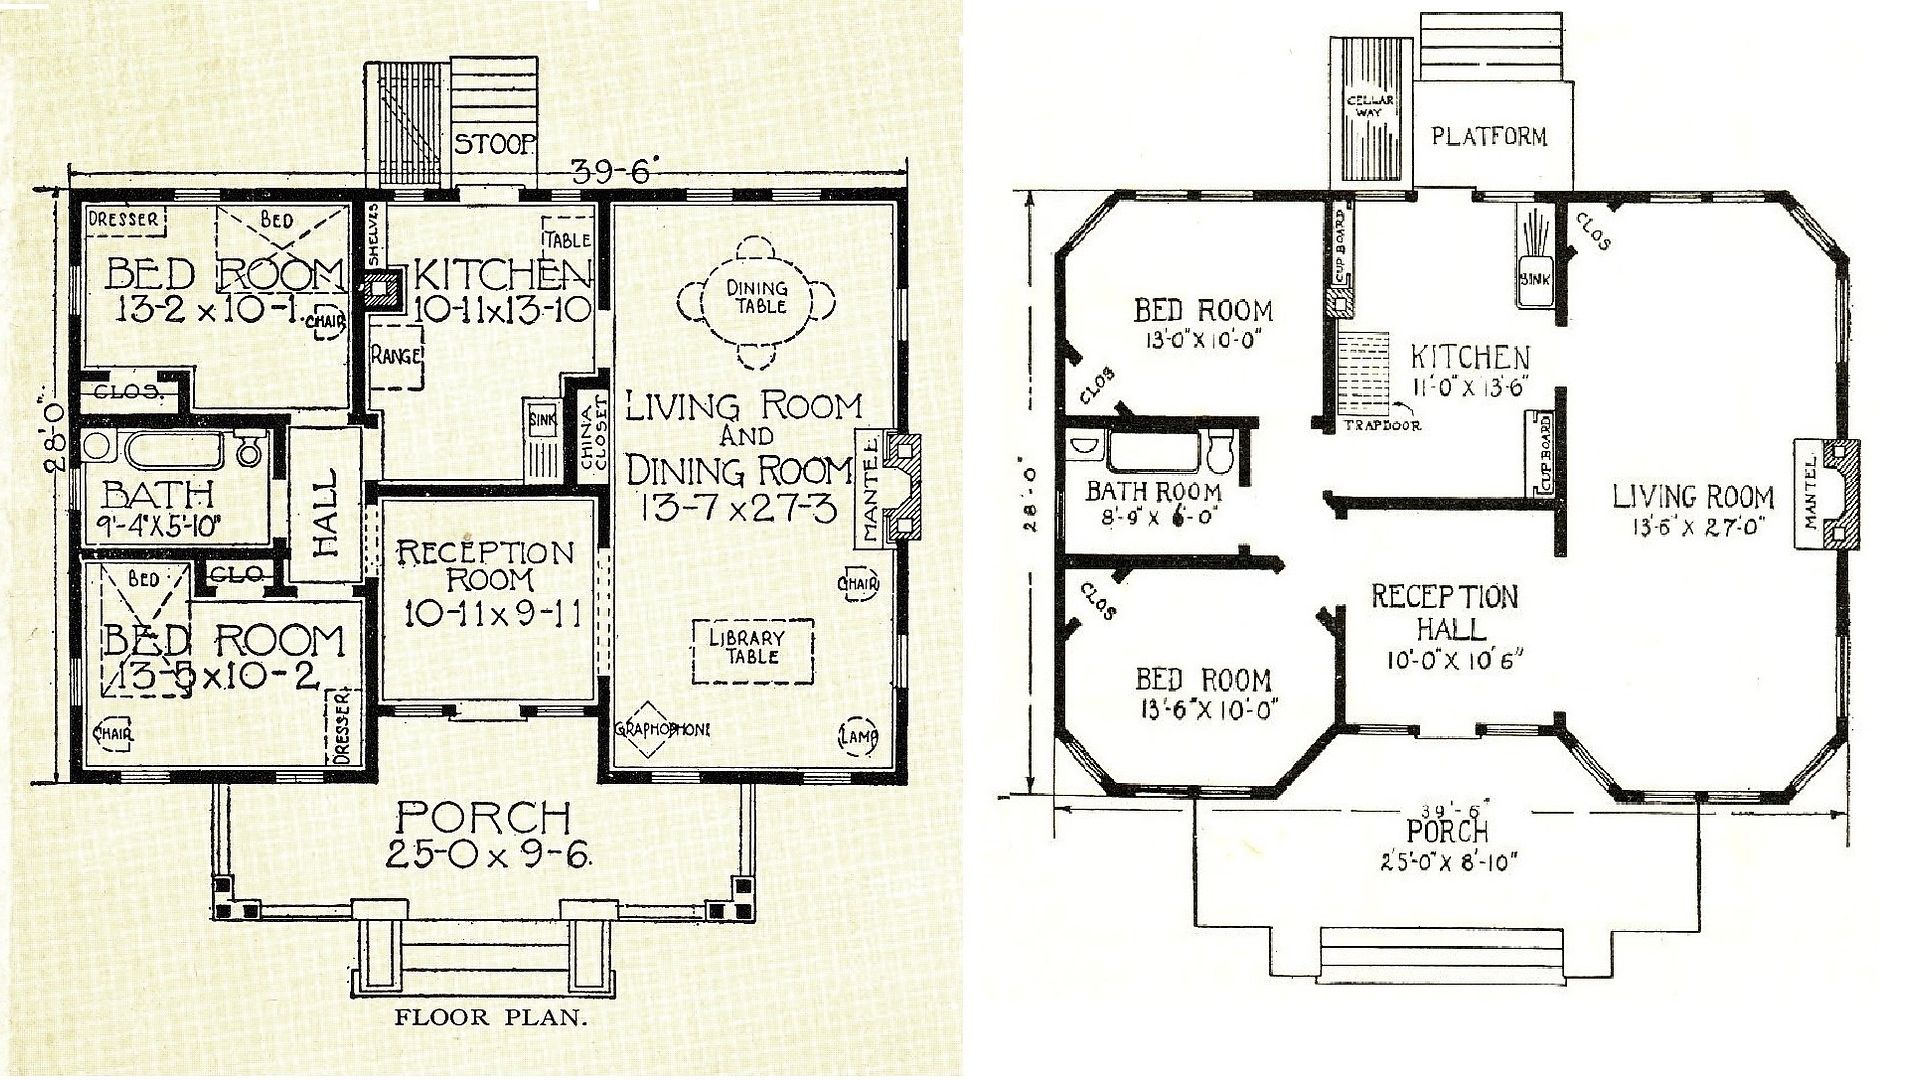 The two homes shared a floorplan that was very close. 